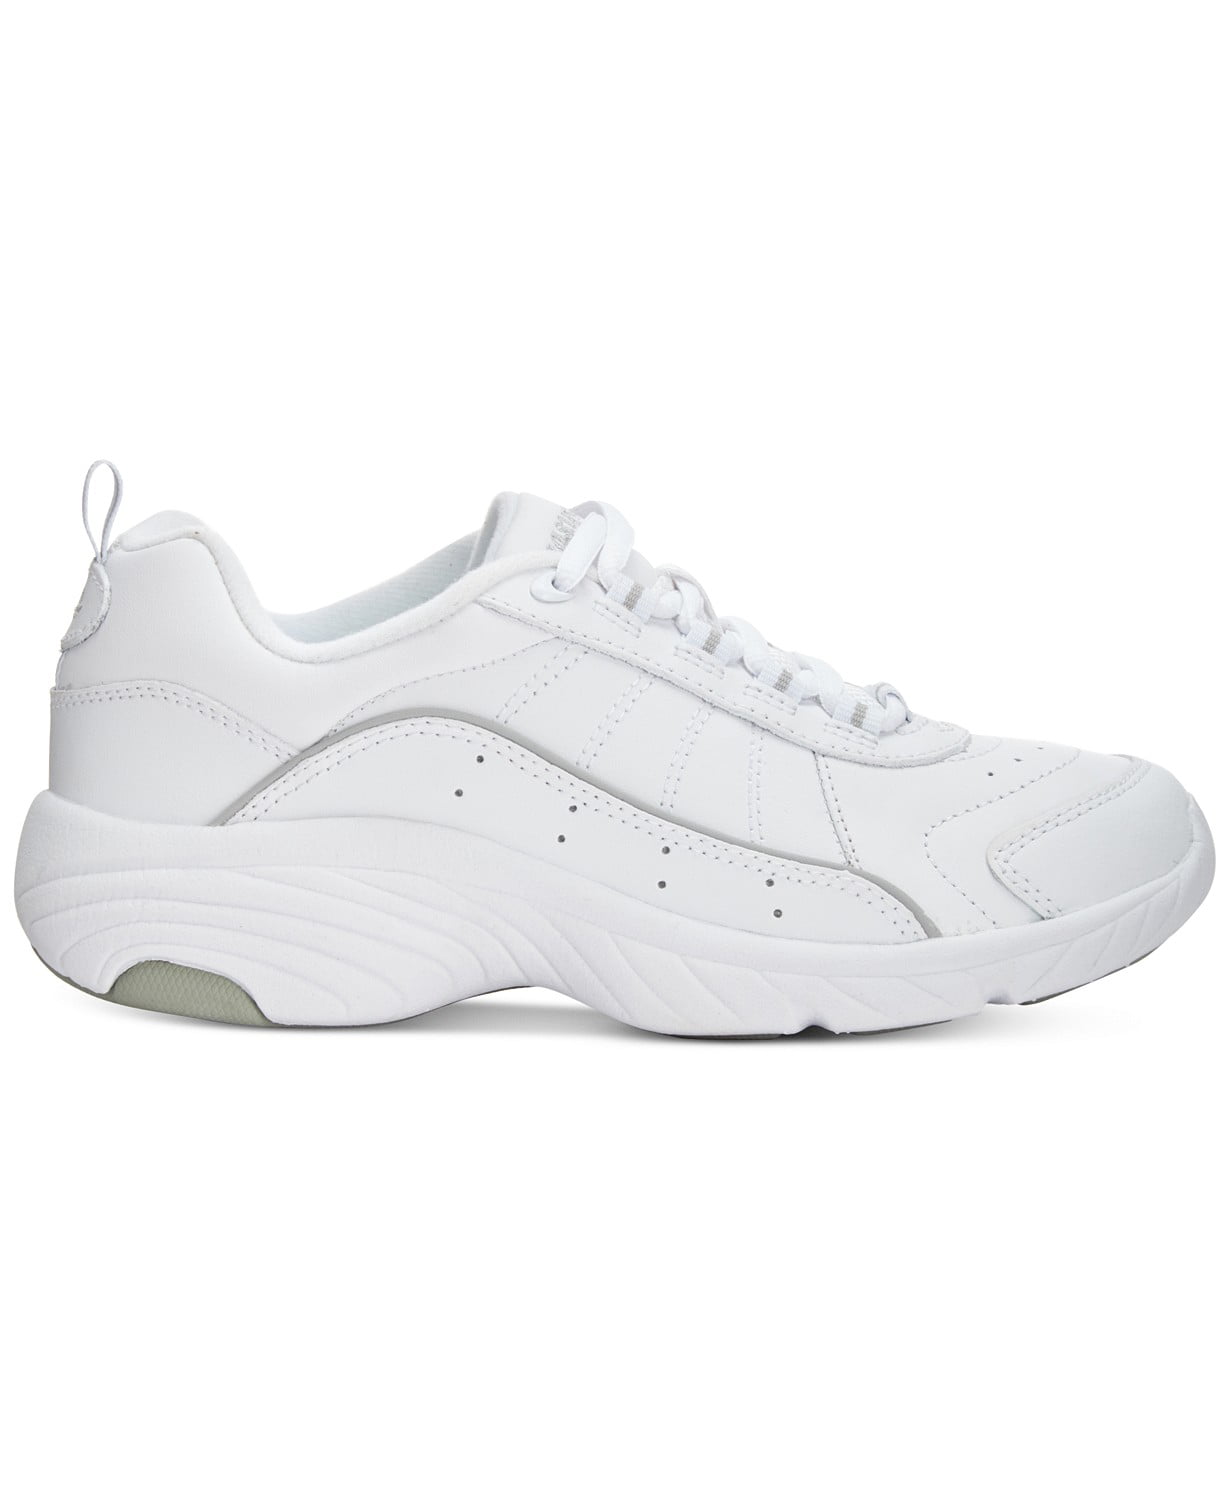 woocommerce-673321-2209615.cloudwaysapps.com-easy-spirit-womens-white-leather-punter-sneakers